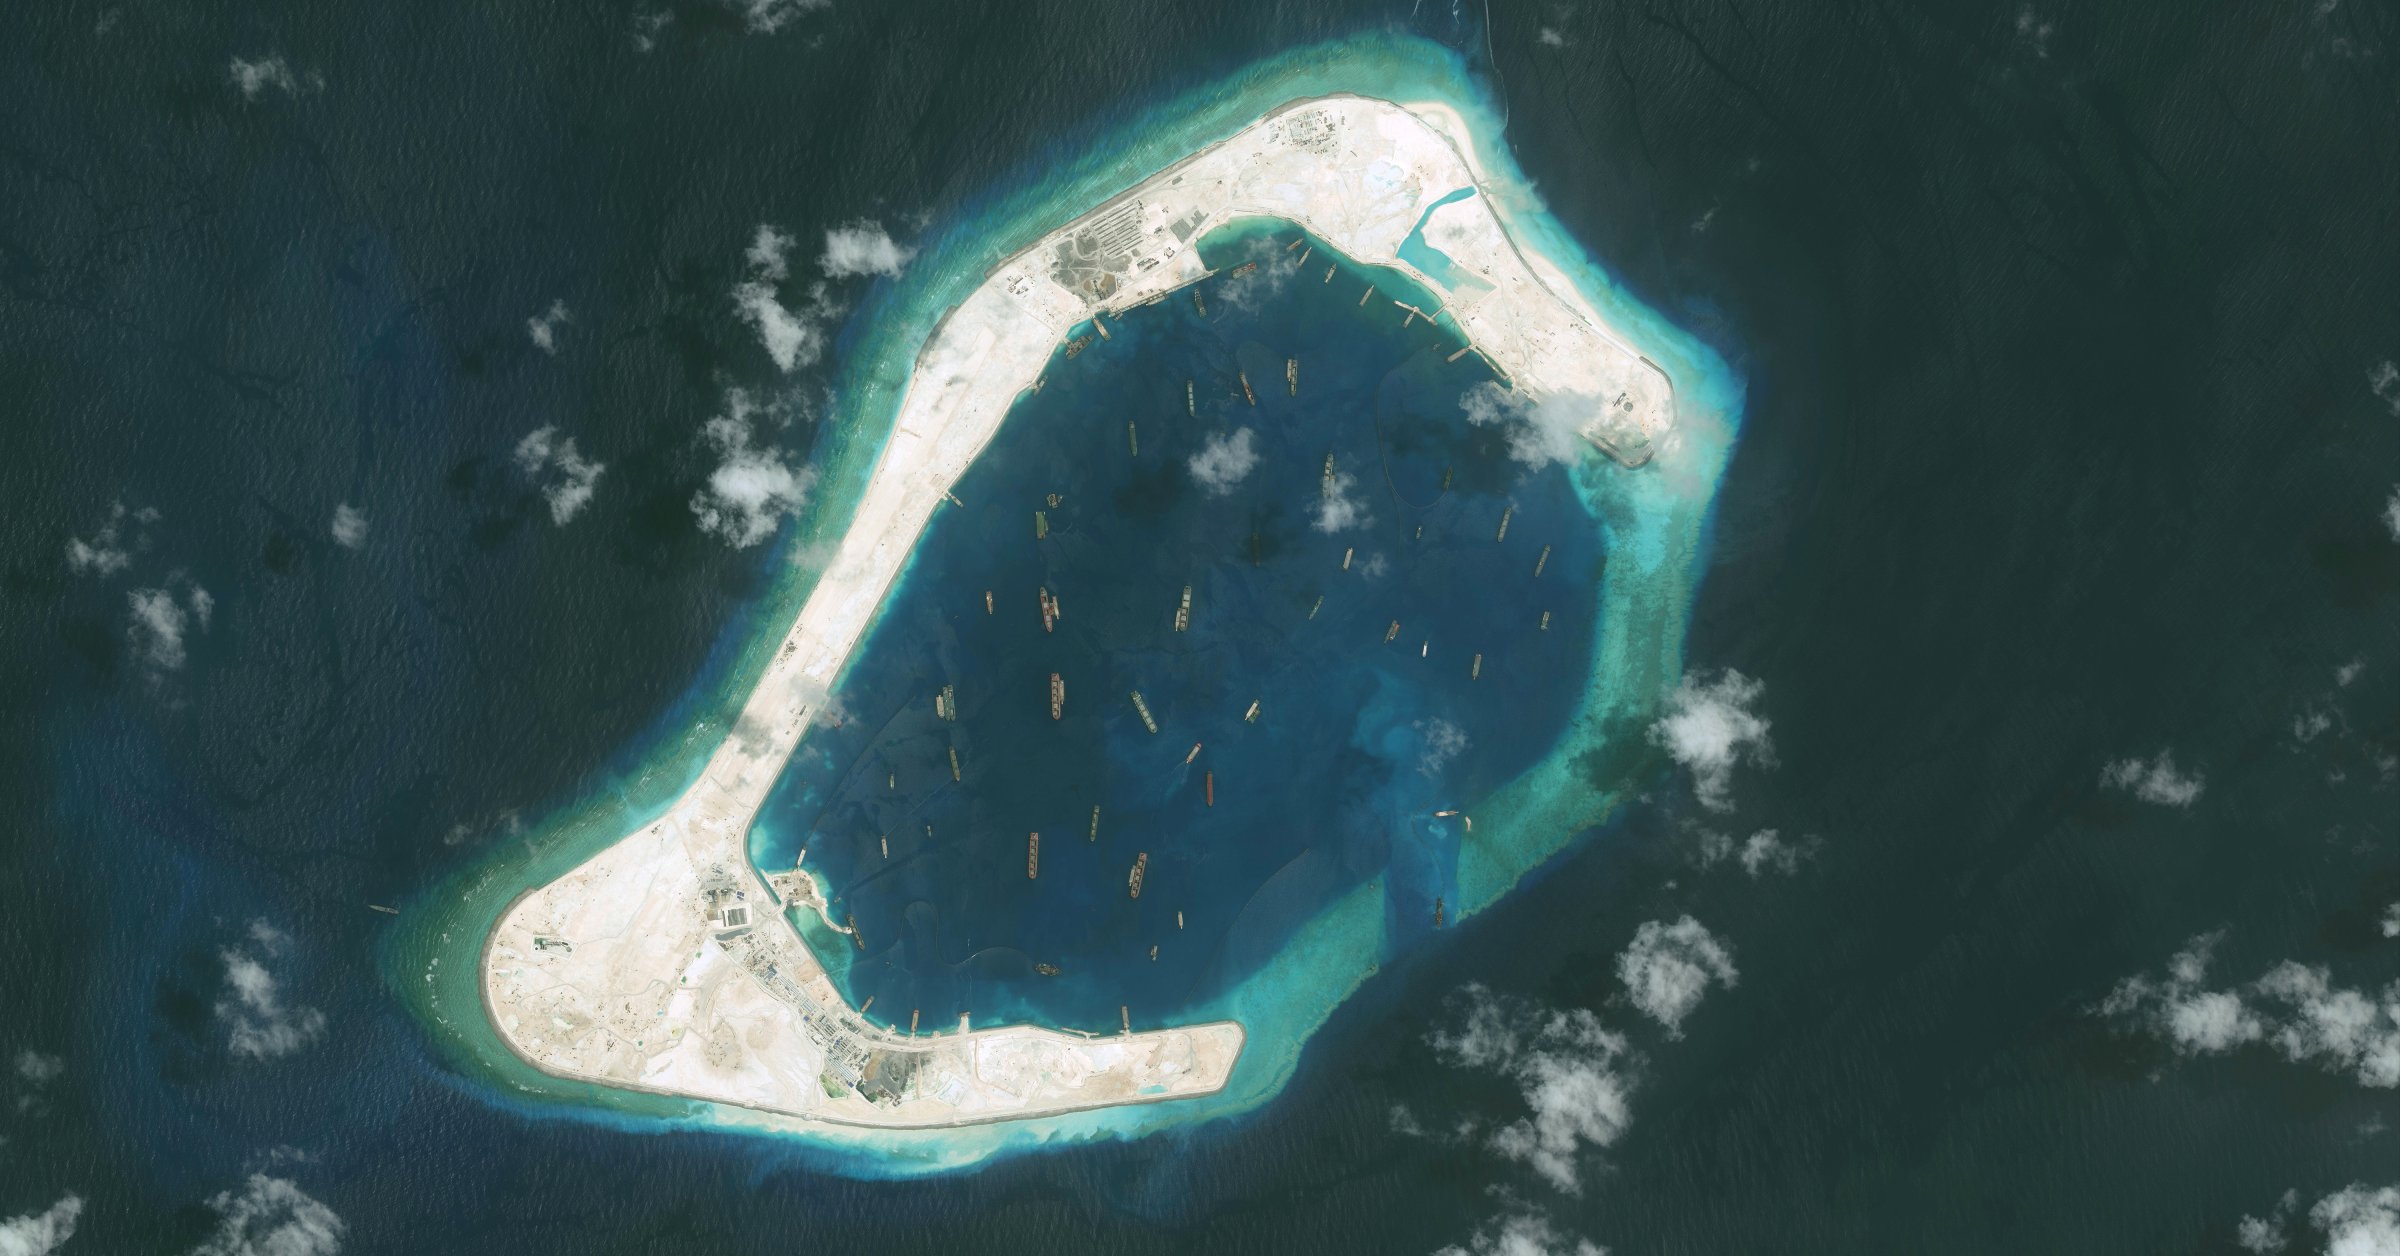 DigitalGlobe imagery shows the Subi Reef in the South China Sea, a part of the Spratly Islands group, on Sept. 1, 2015.